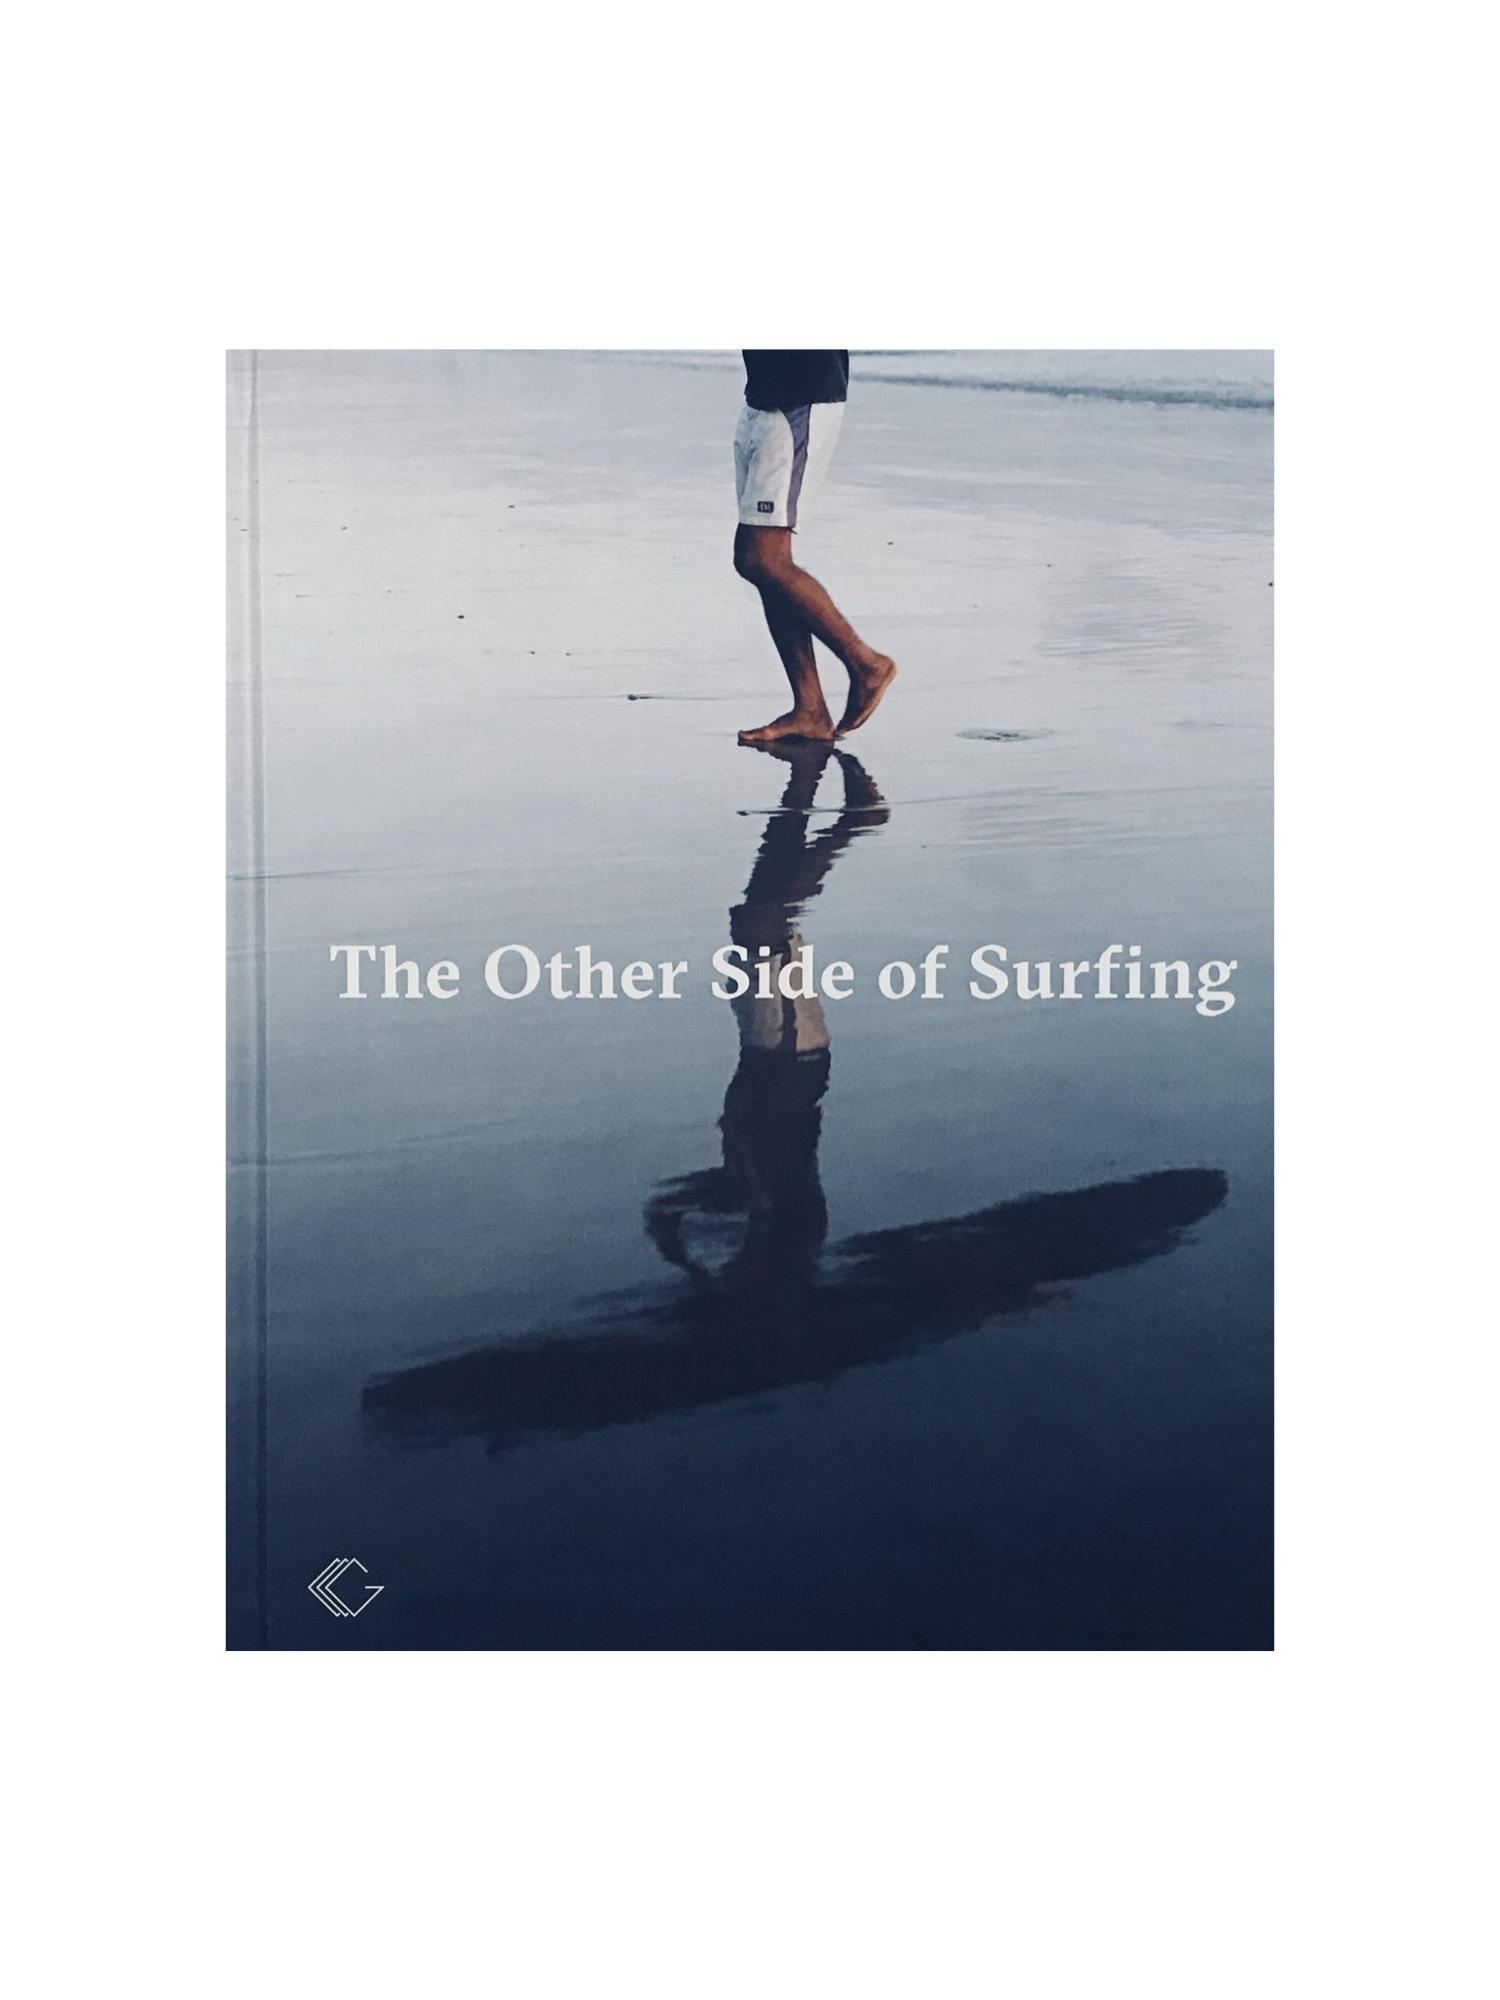 THE OTHER SIDE OF SURFING